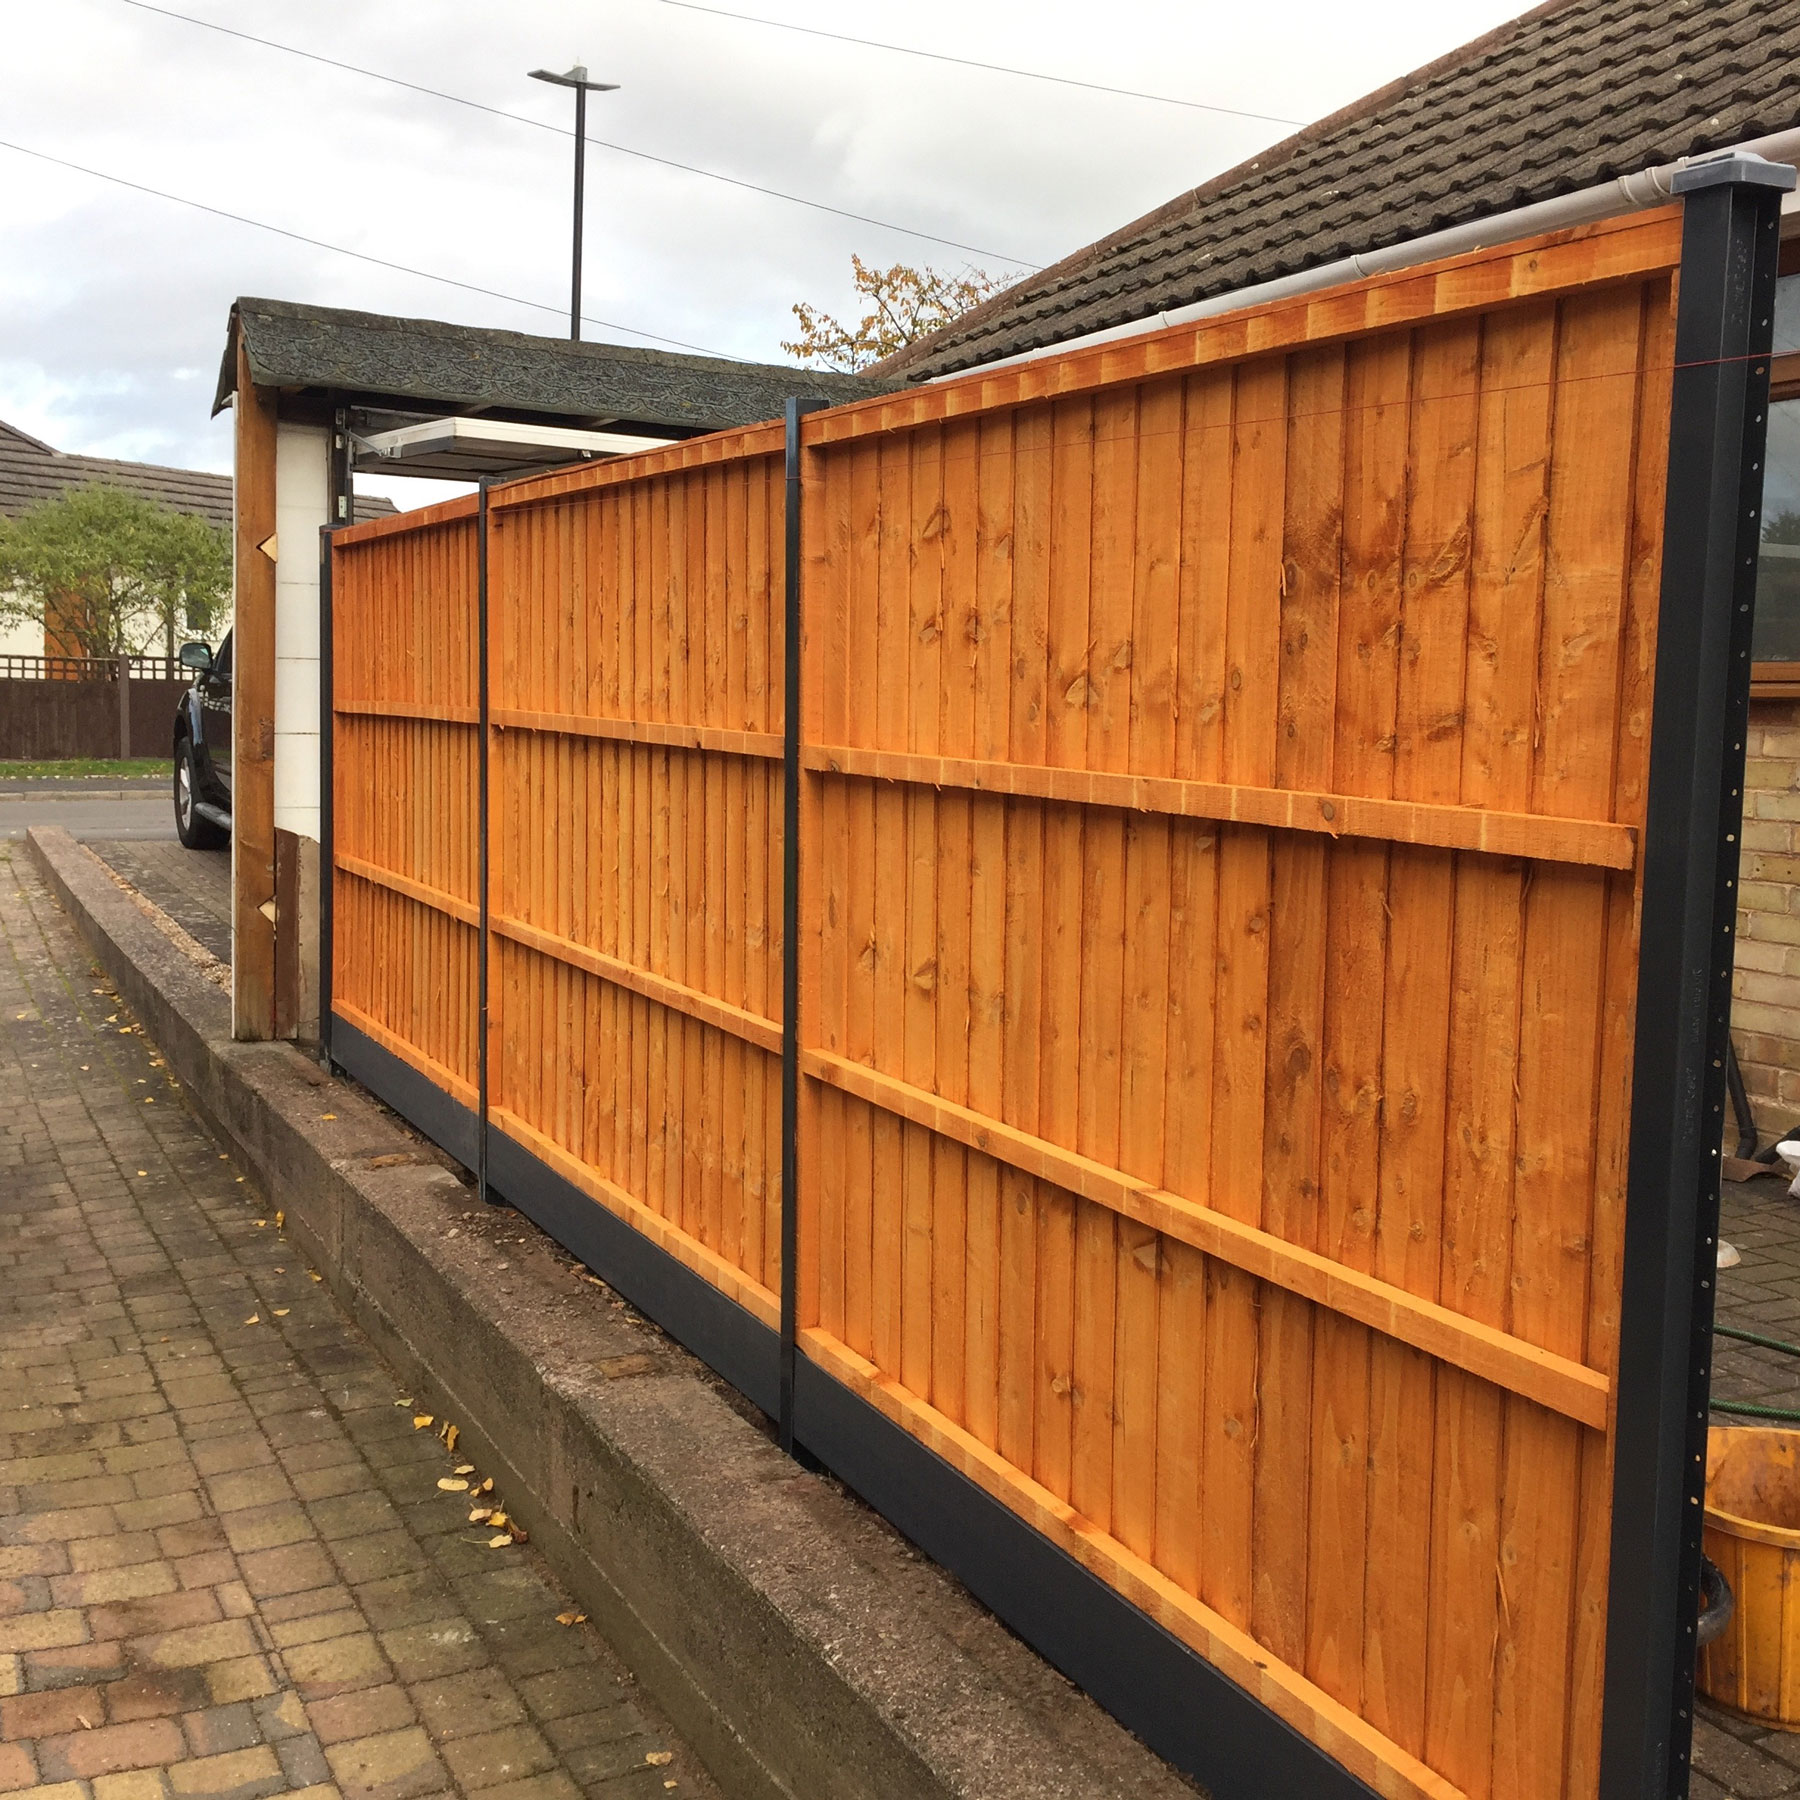 Third 5 feet high fence panel fitted 